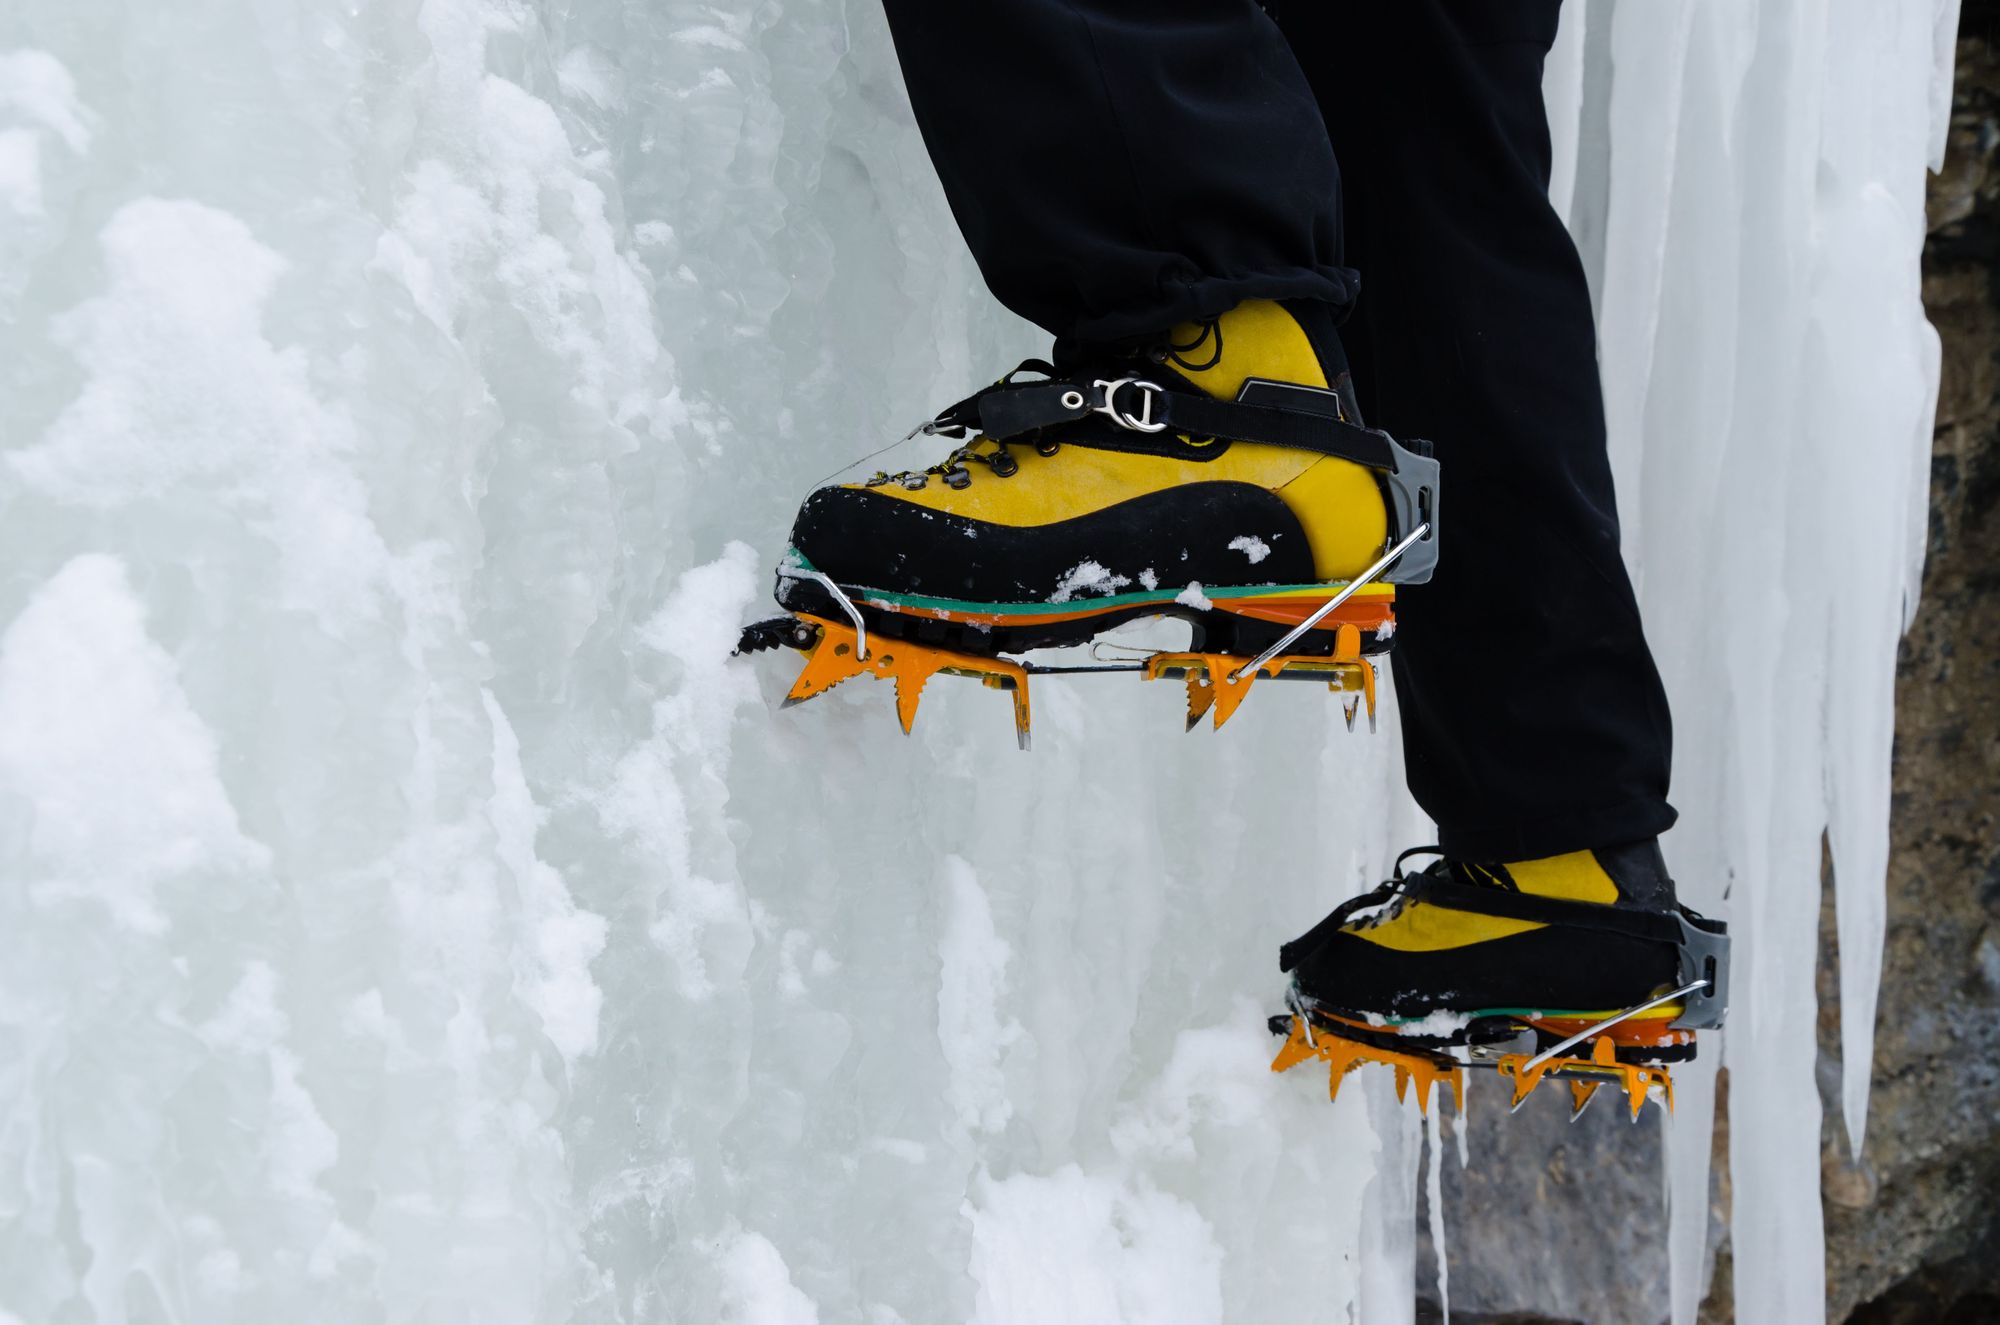 A close up of crampons driving into a wall of ice.